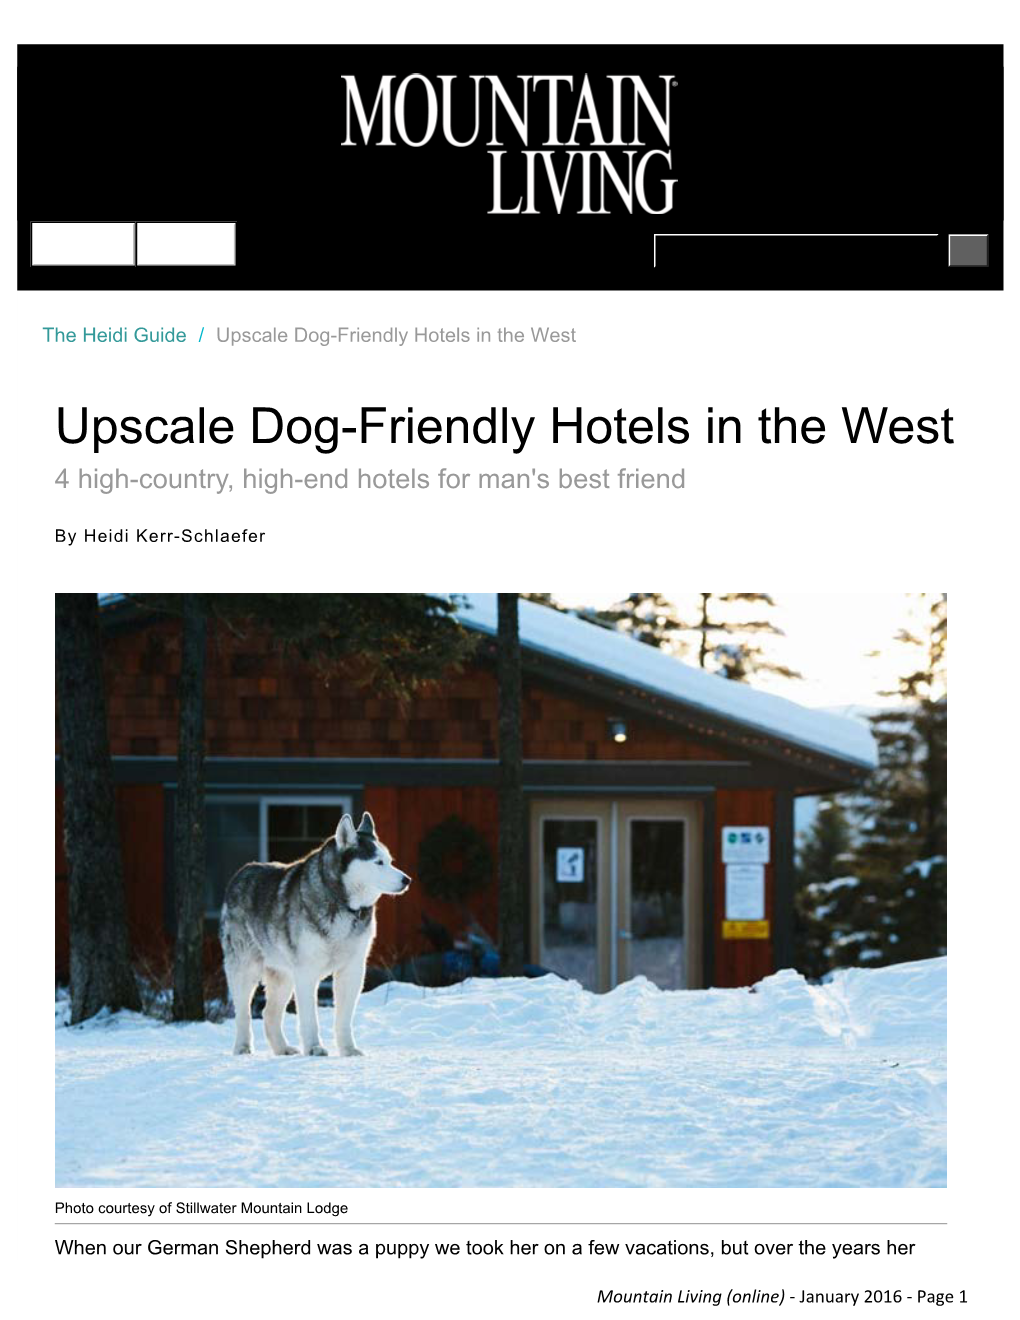 Upscale Dog-Friendly Hotels in the West